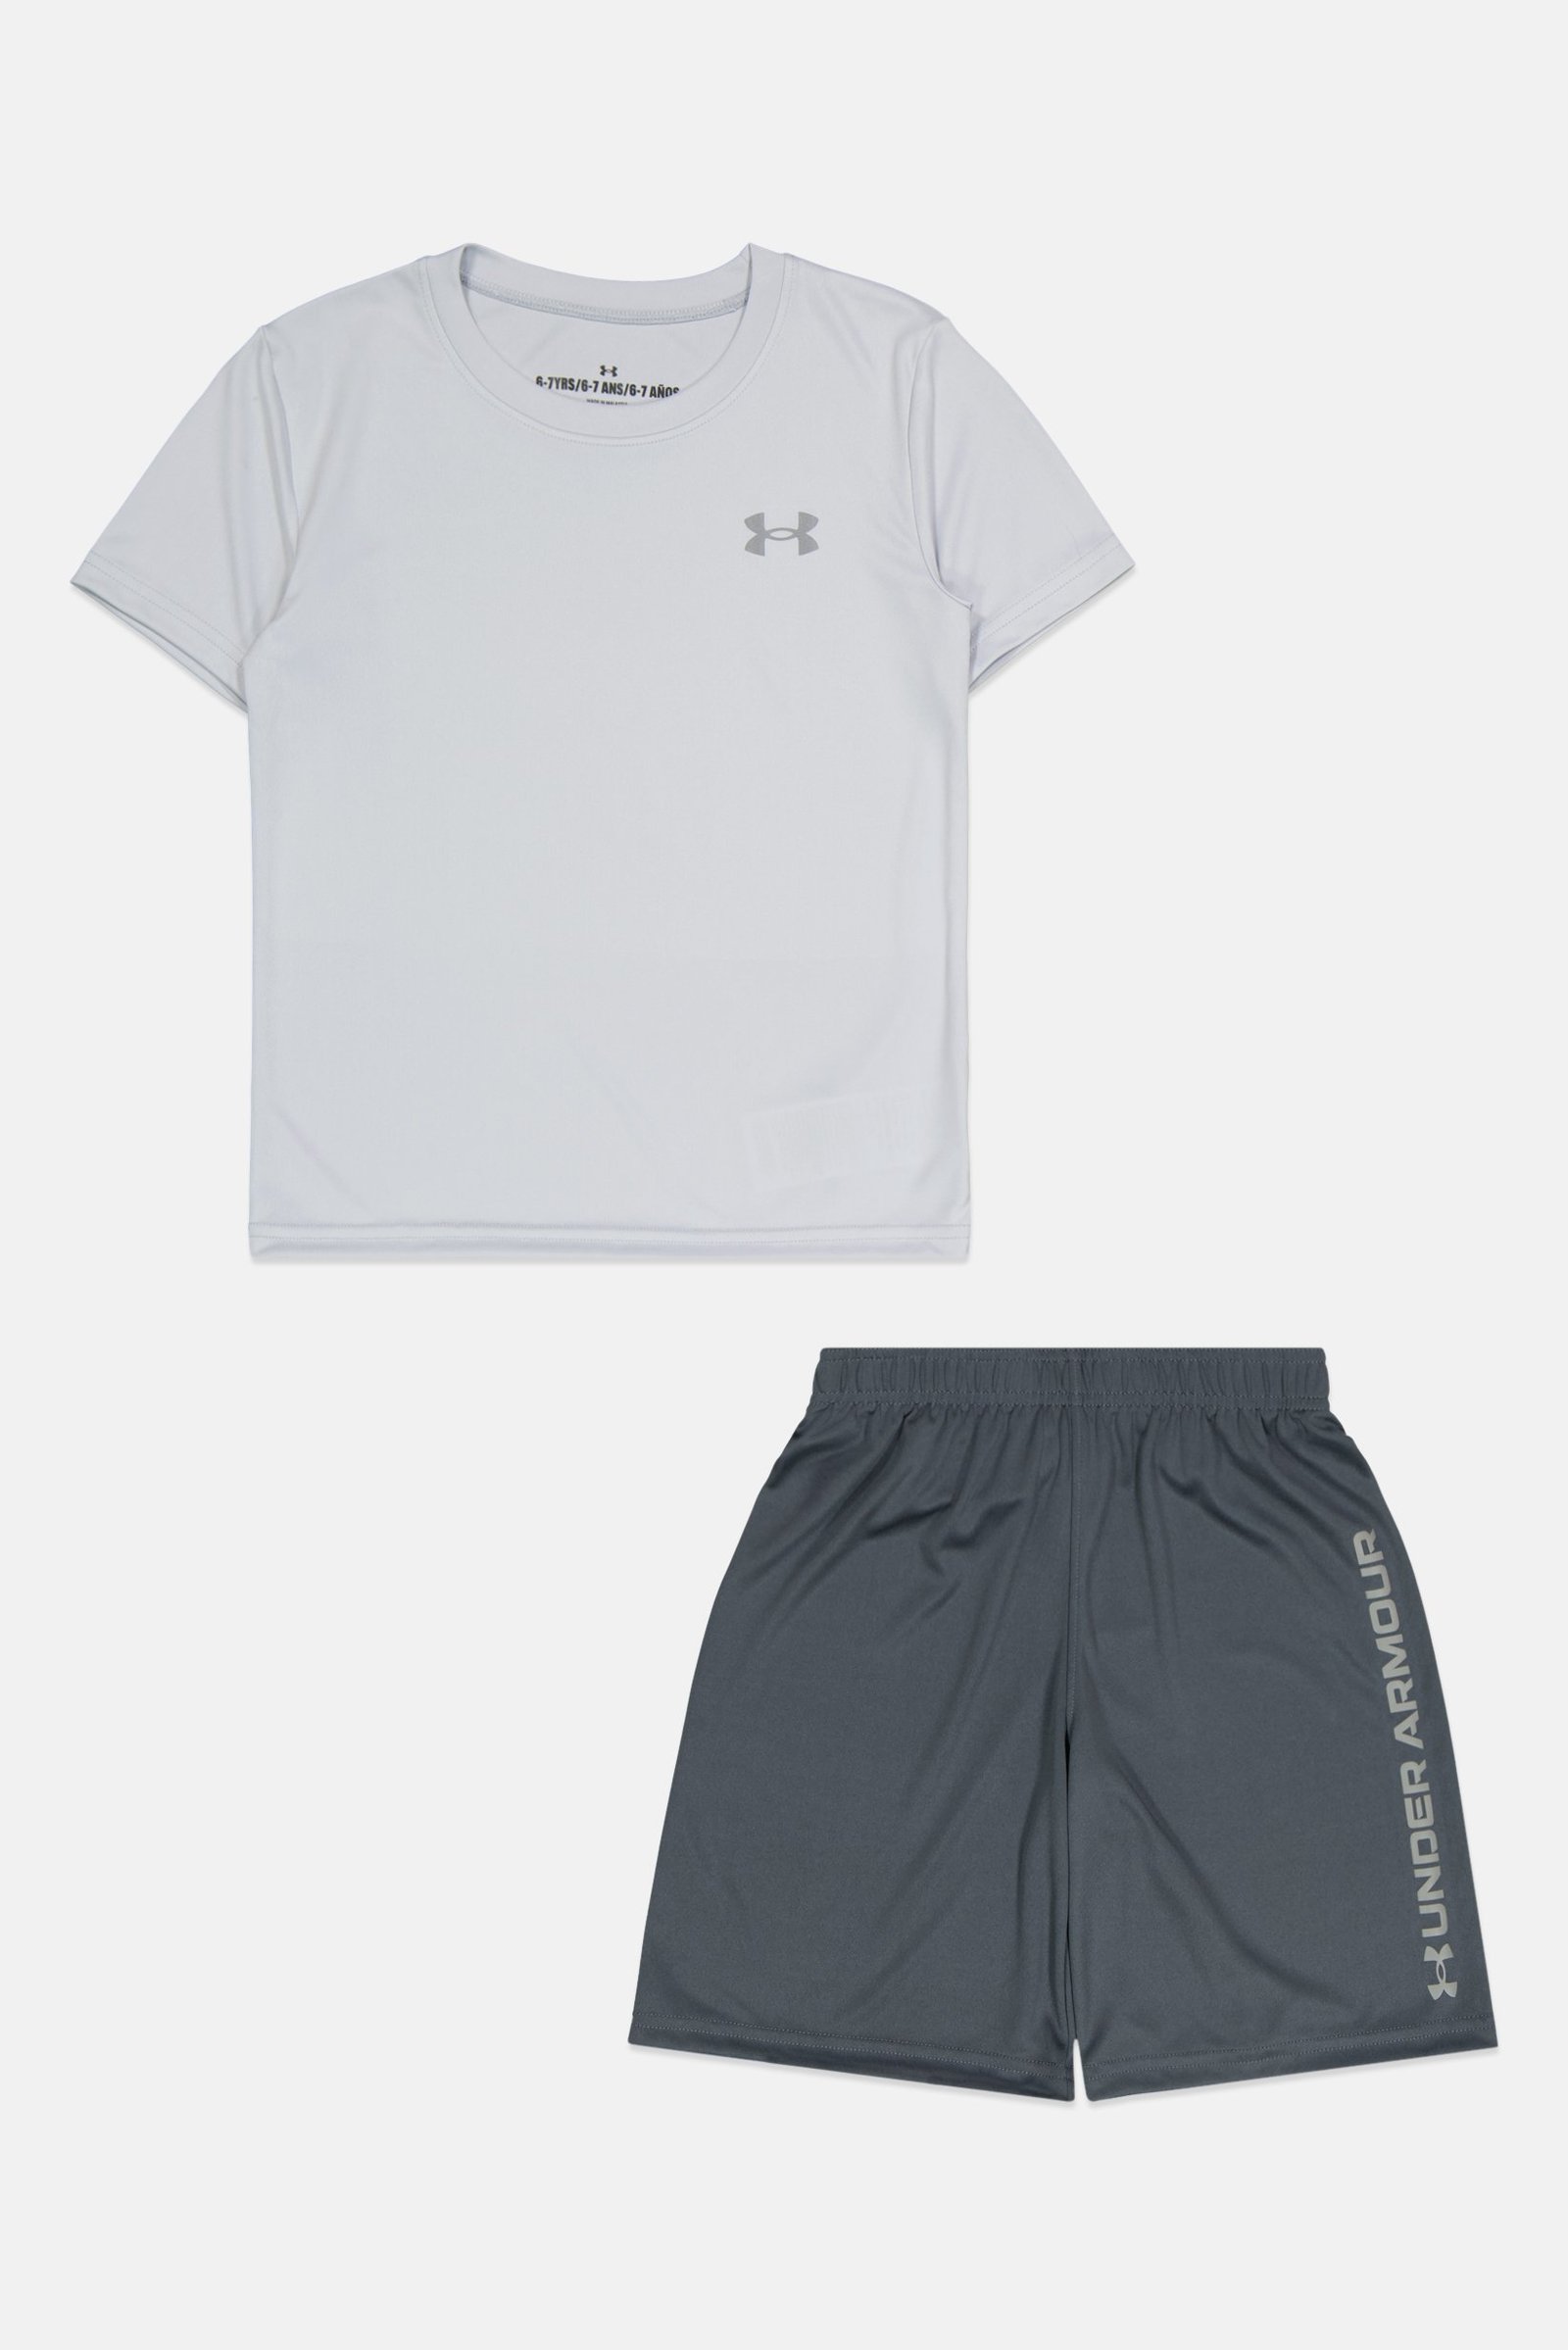 Buy Under Armour kids boys 2 pieces sportswear fit top and shorts grey Online | Brands For Less